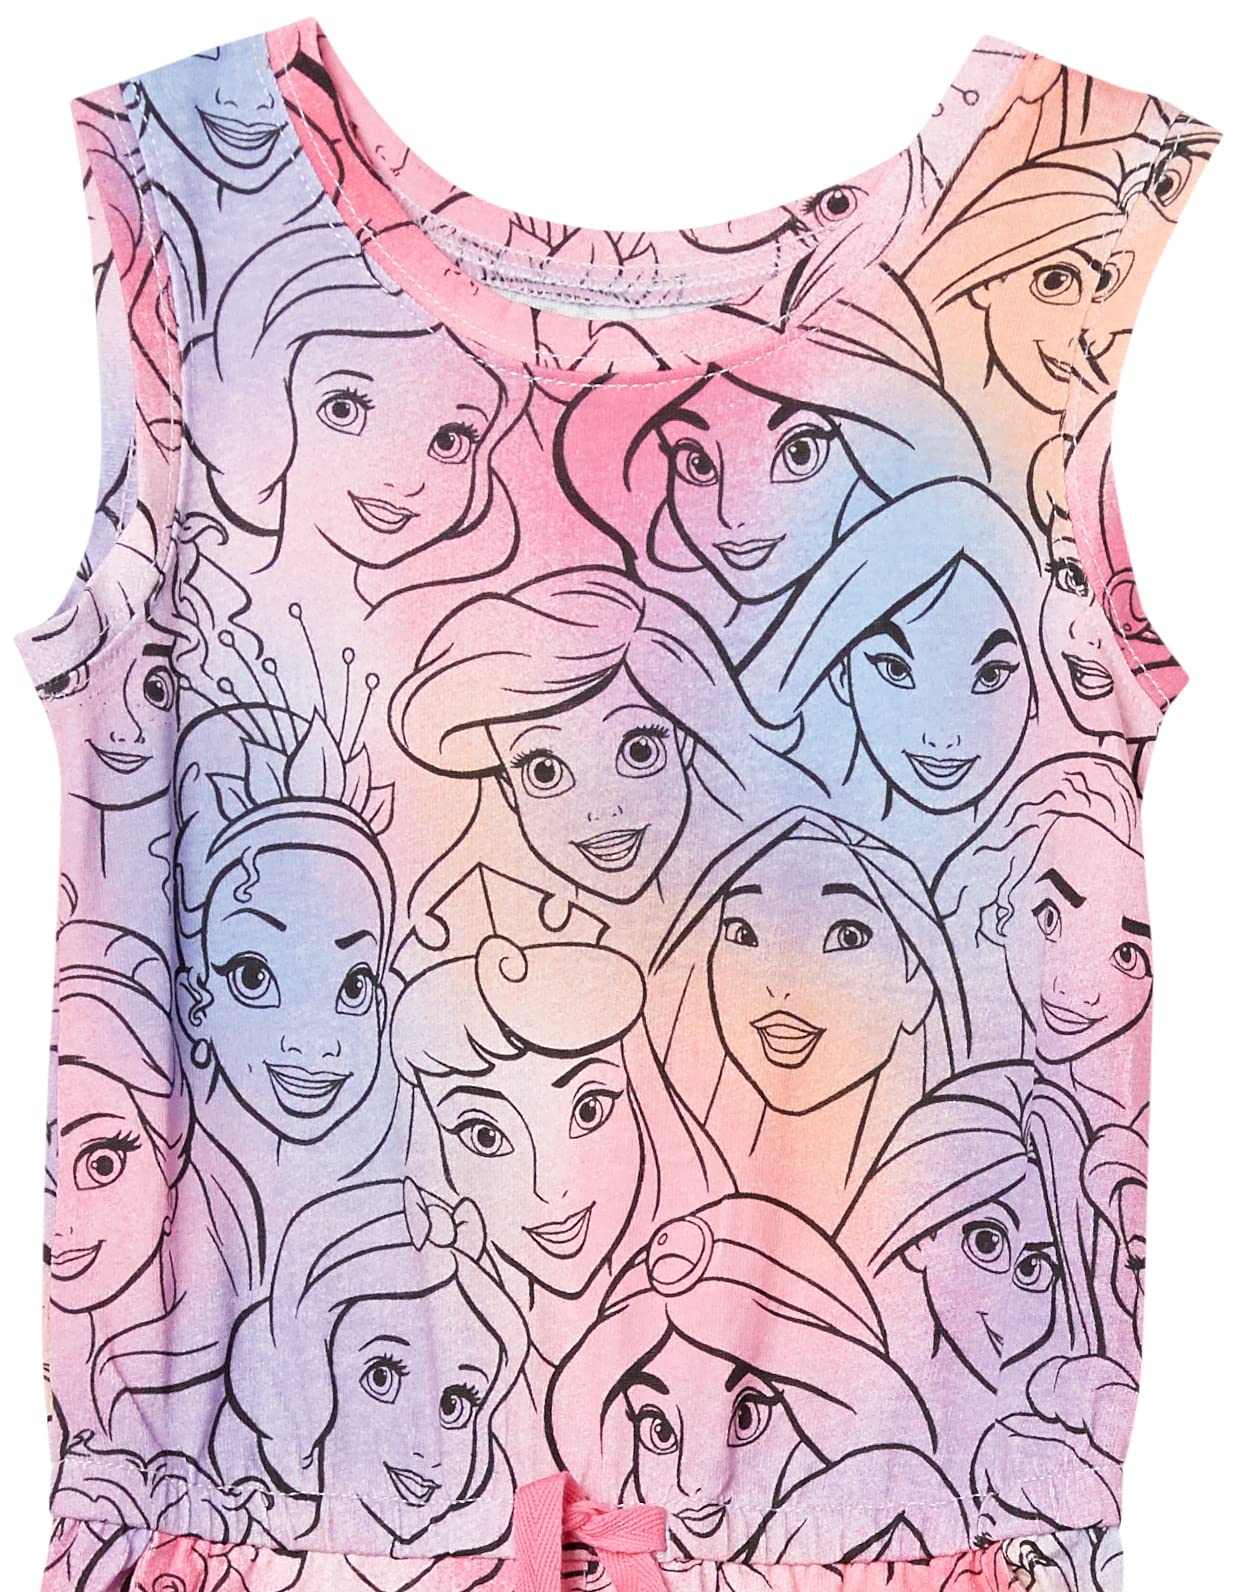 Amazon Essentials Disney | Marvel | Star Wars | Frozen | Princess Girls' Knit Sleeveless Rompers (Previously Spotted Zebra), Pack of 2, Princess/Friendship, Large